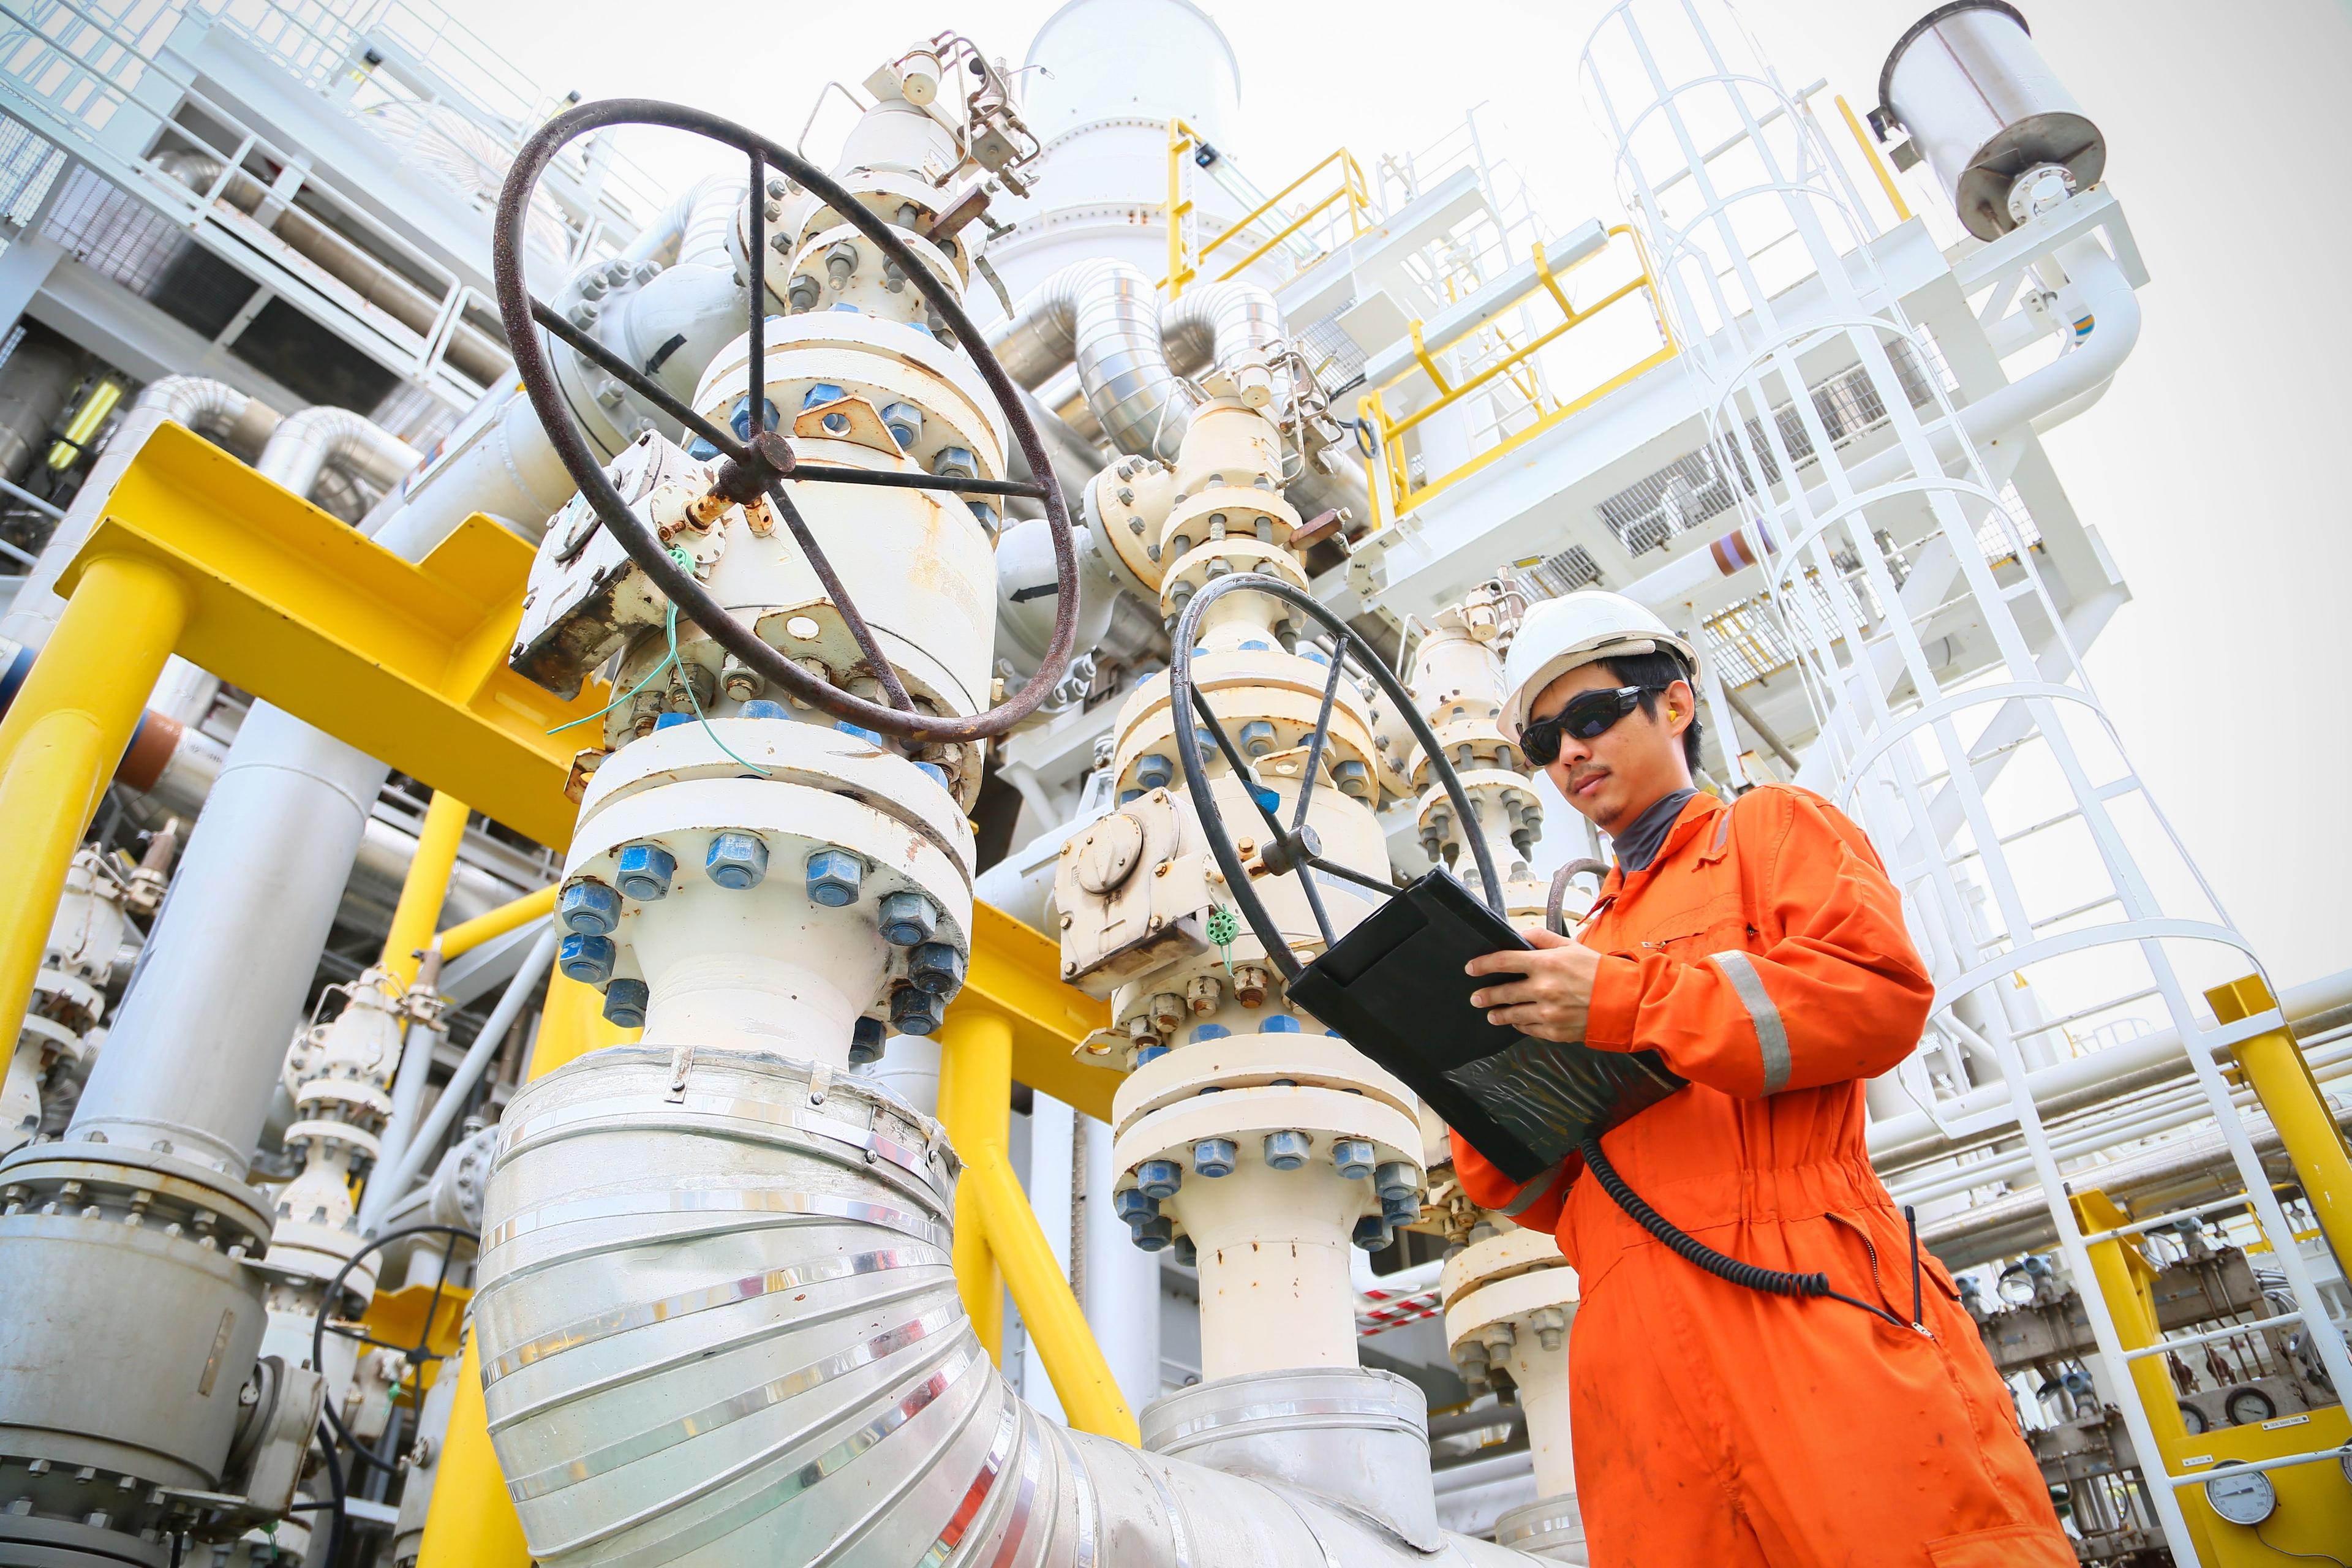 Is oil & gas production a good career path?